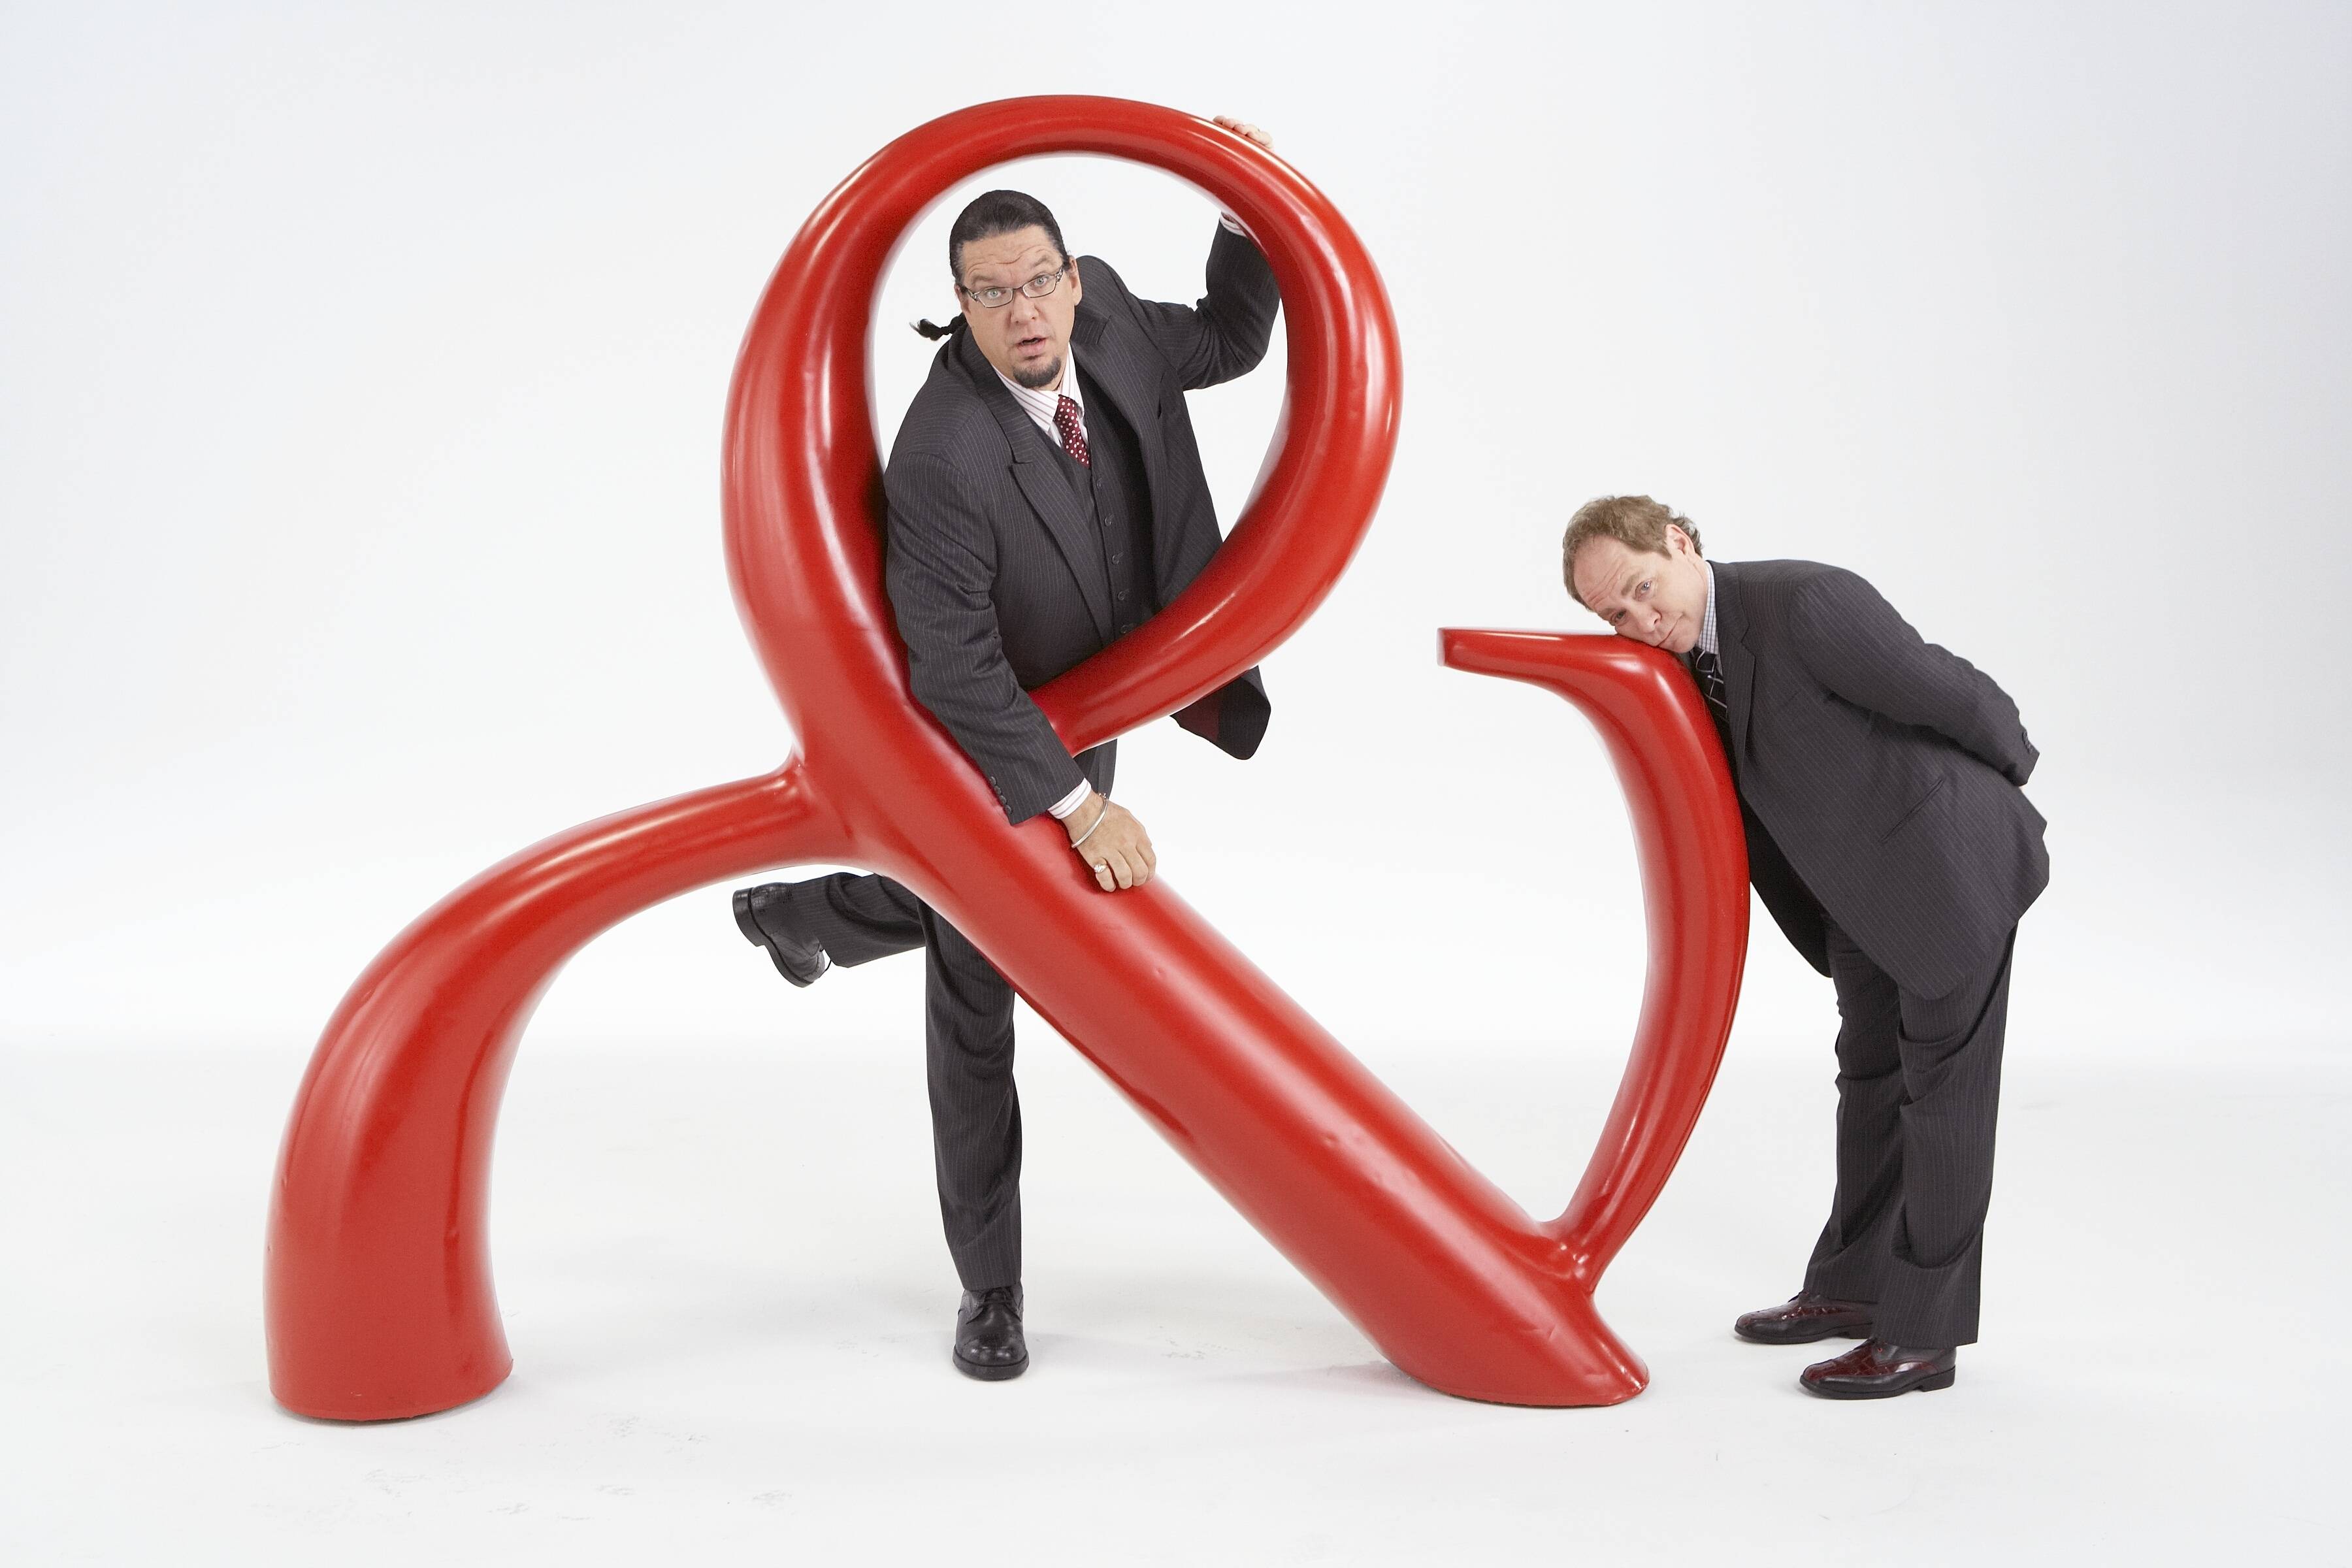 Penn and Teller image Wallpaper HD HD wallpaper and background